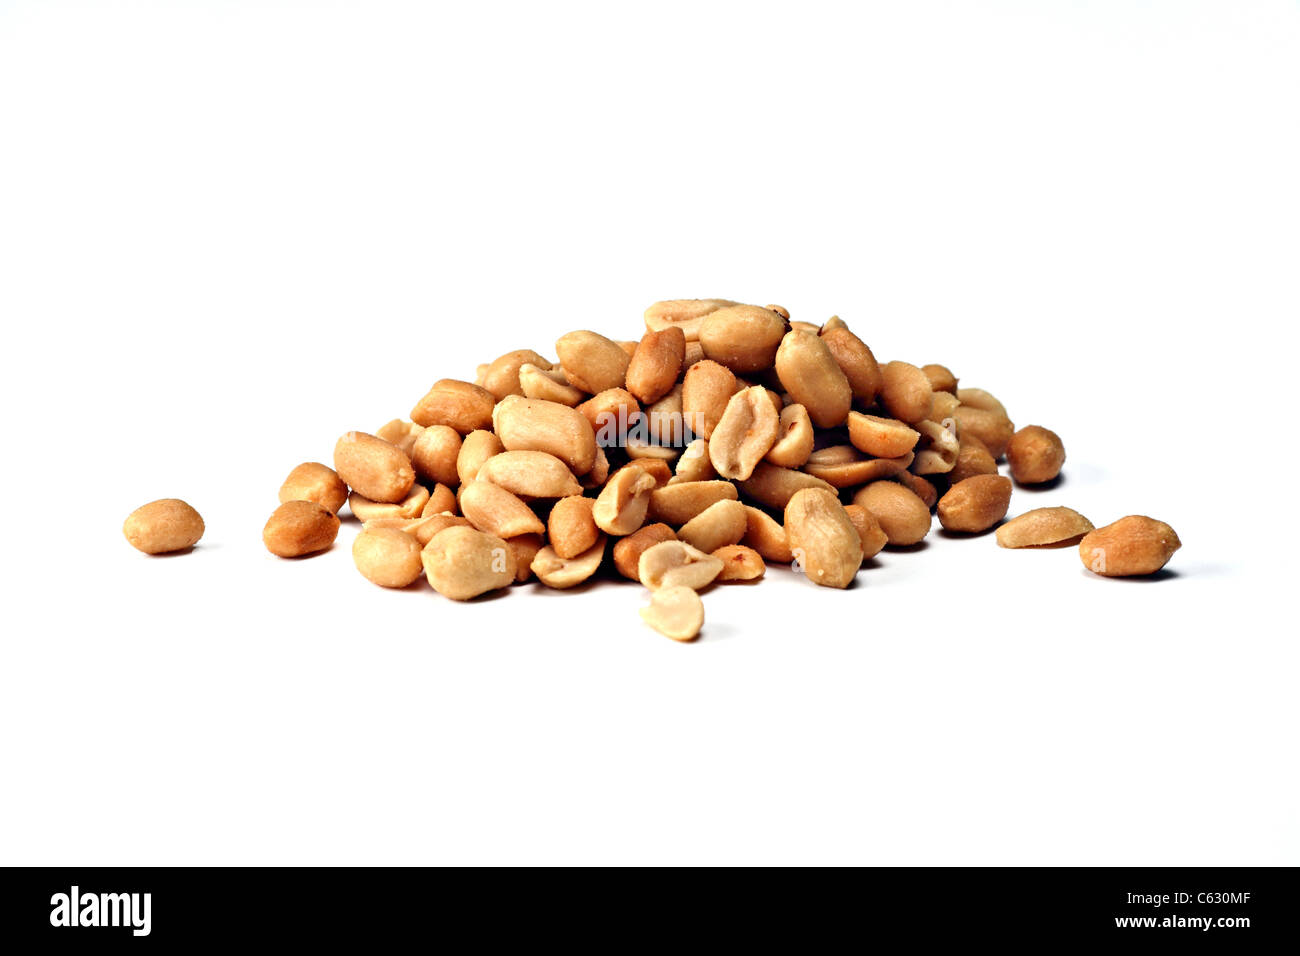 Salted peanuts on white background Stock Photo